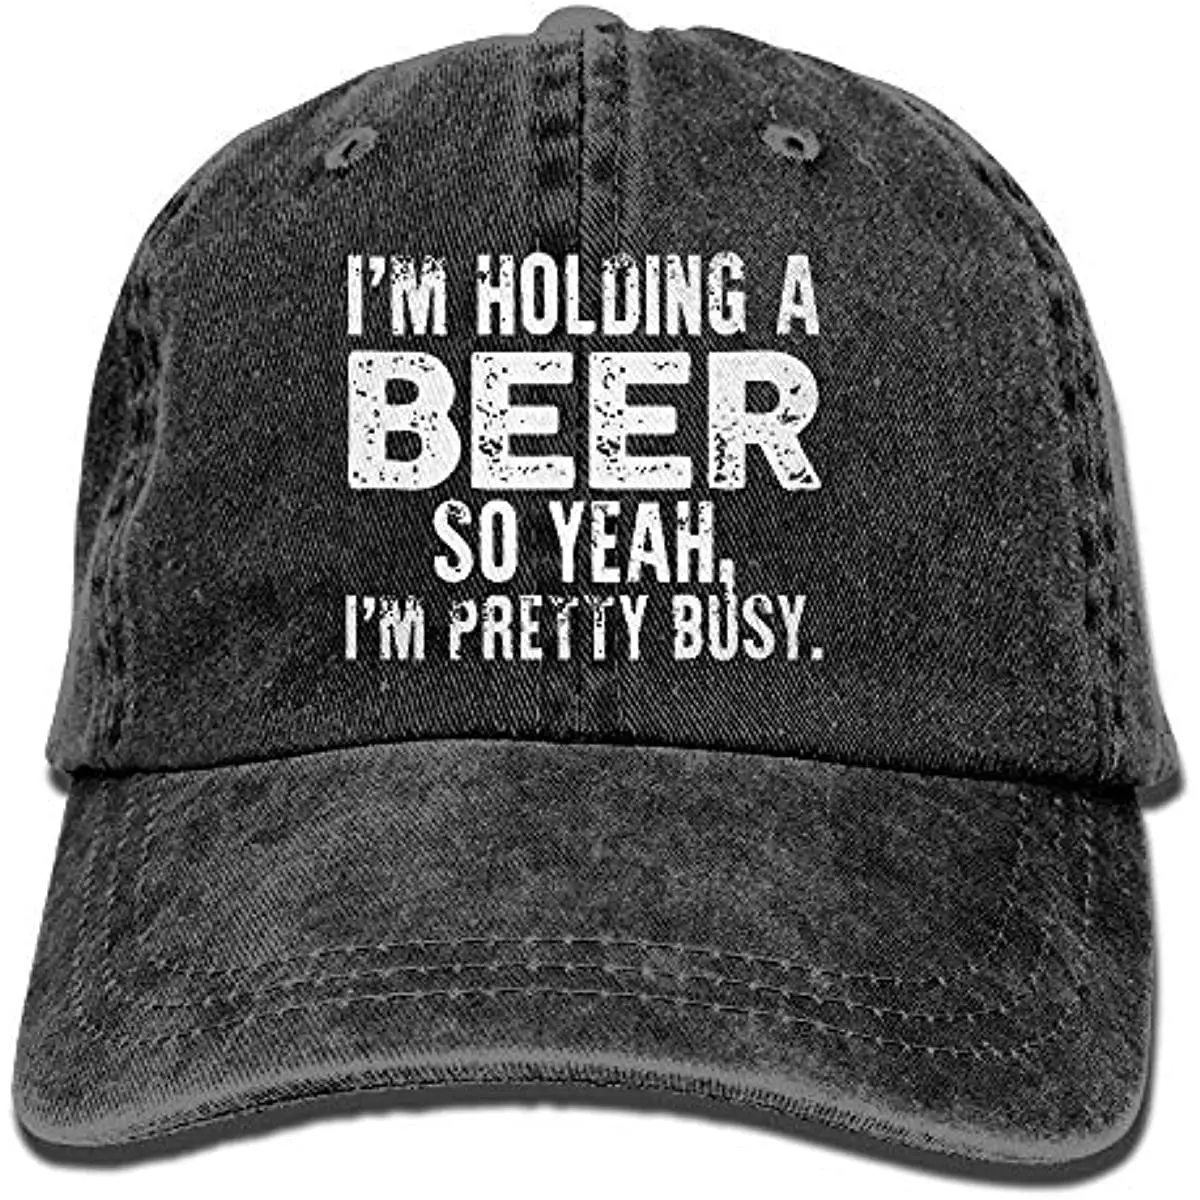 

I'm Holding A Beer So Yeah I'm Pretty Busy Retro Washed Dyed Adjustable Plain Cowboy Cap Denim Four Seasons Casual